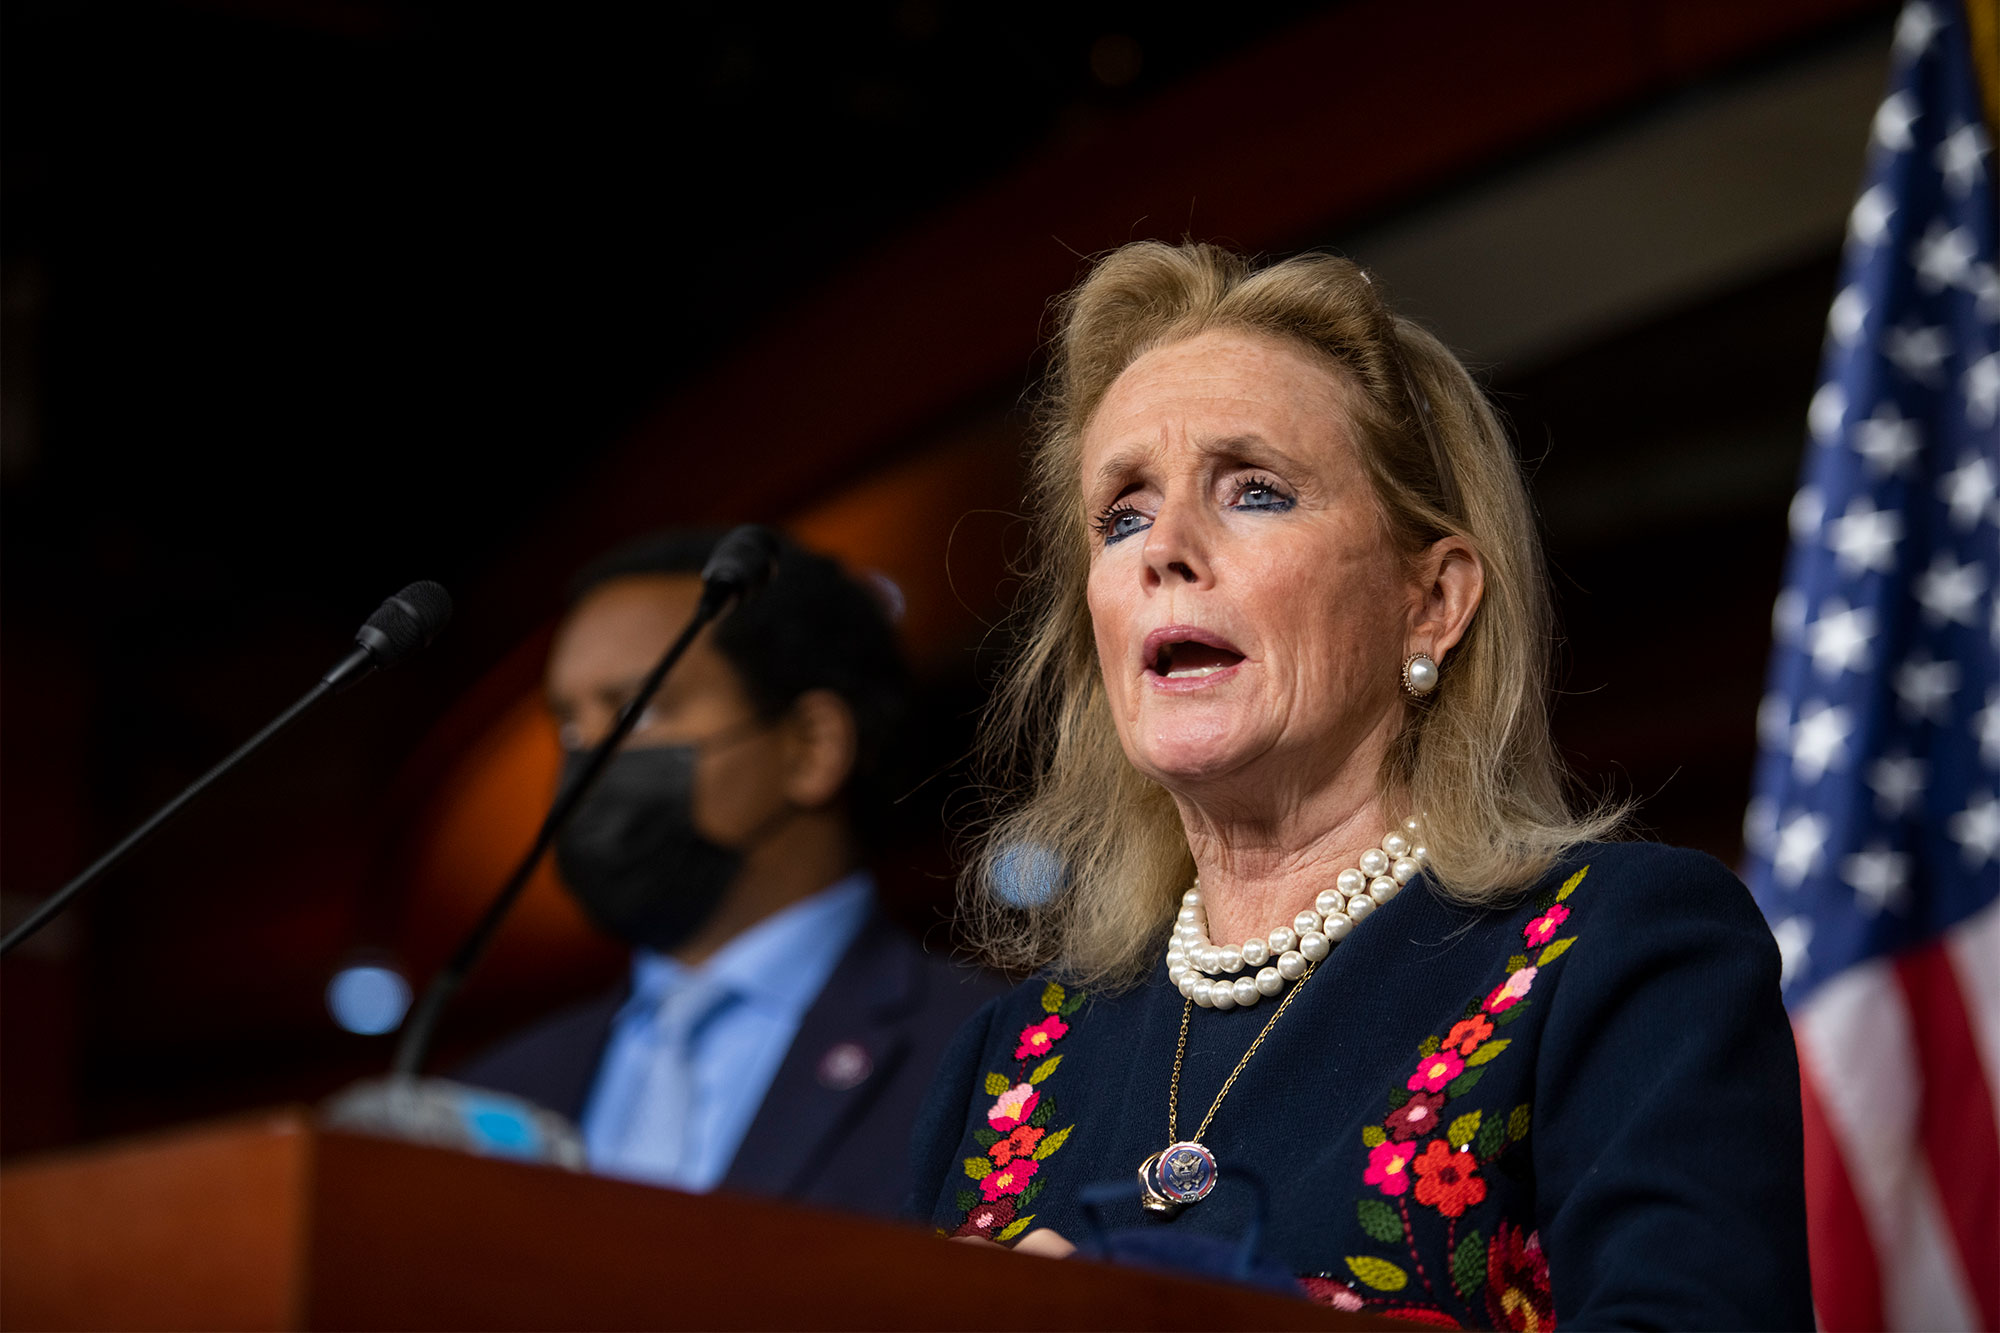 Representative Debbie Dingell said her office was vandalized on Monday.